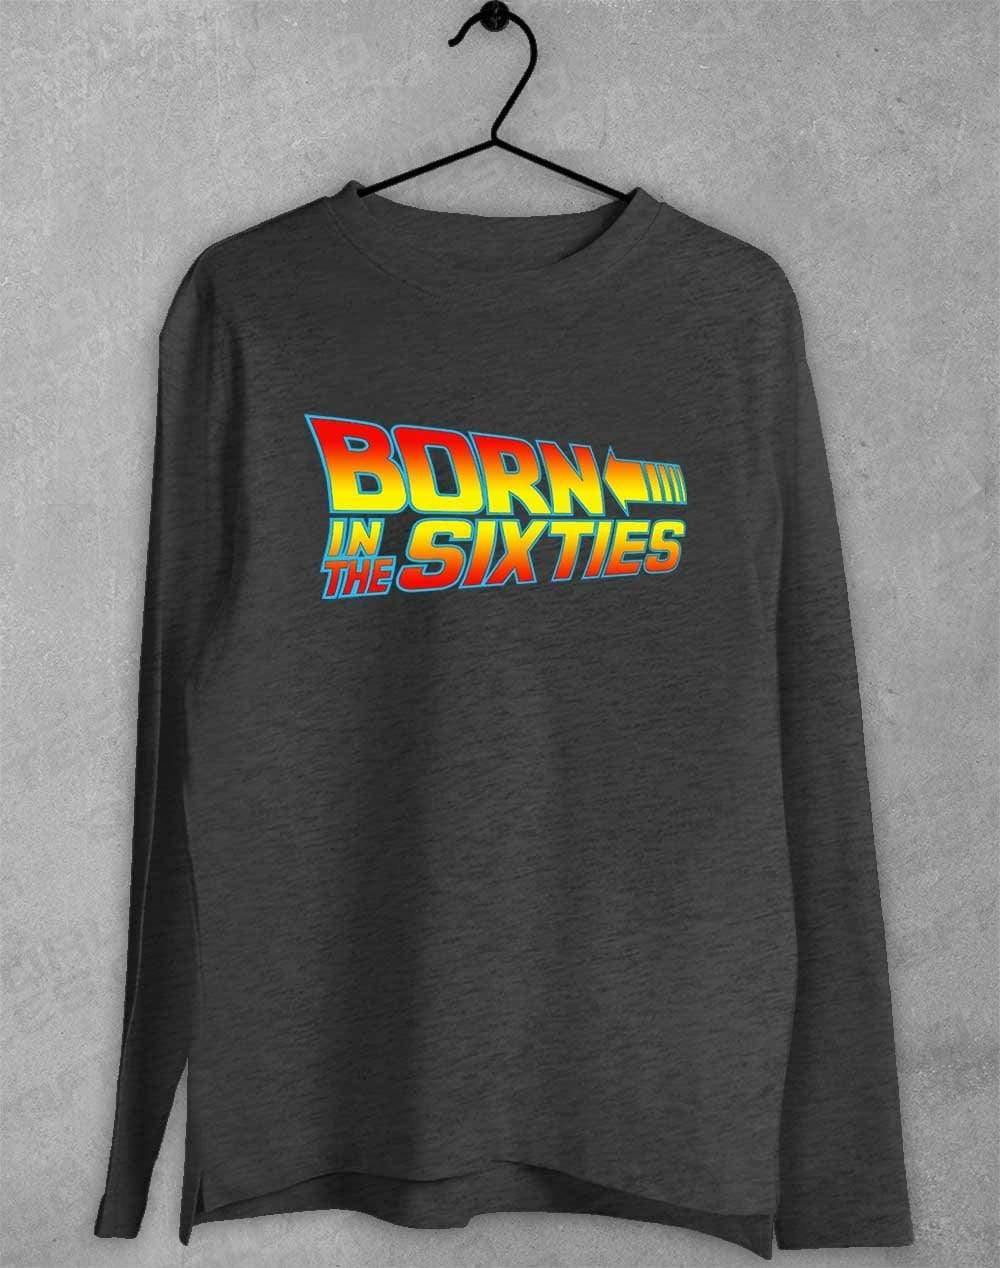 Born in the... (CHOOSE YOUR DECADE!) Long Sleeve T-Shirt 1960s - Dark Heather / S  - Off World Tees